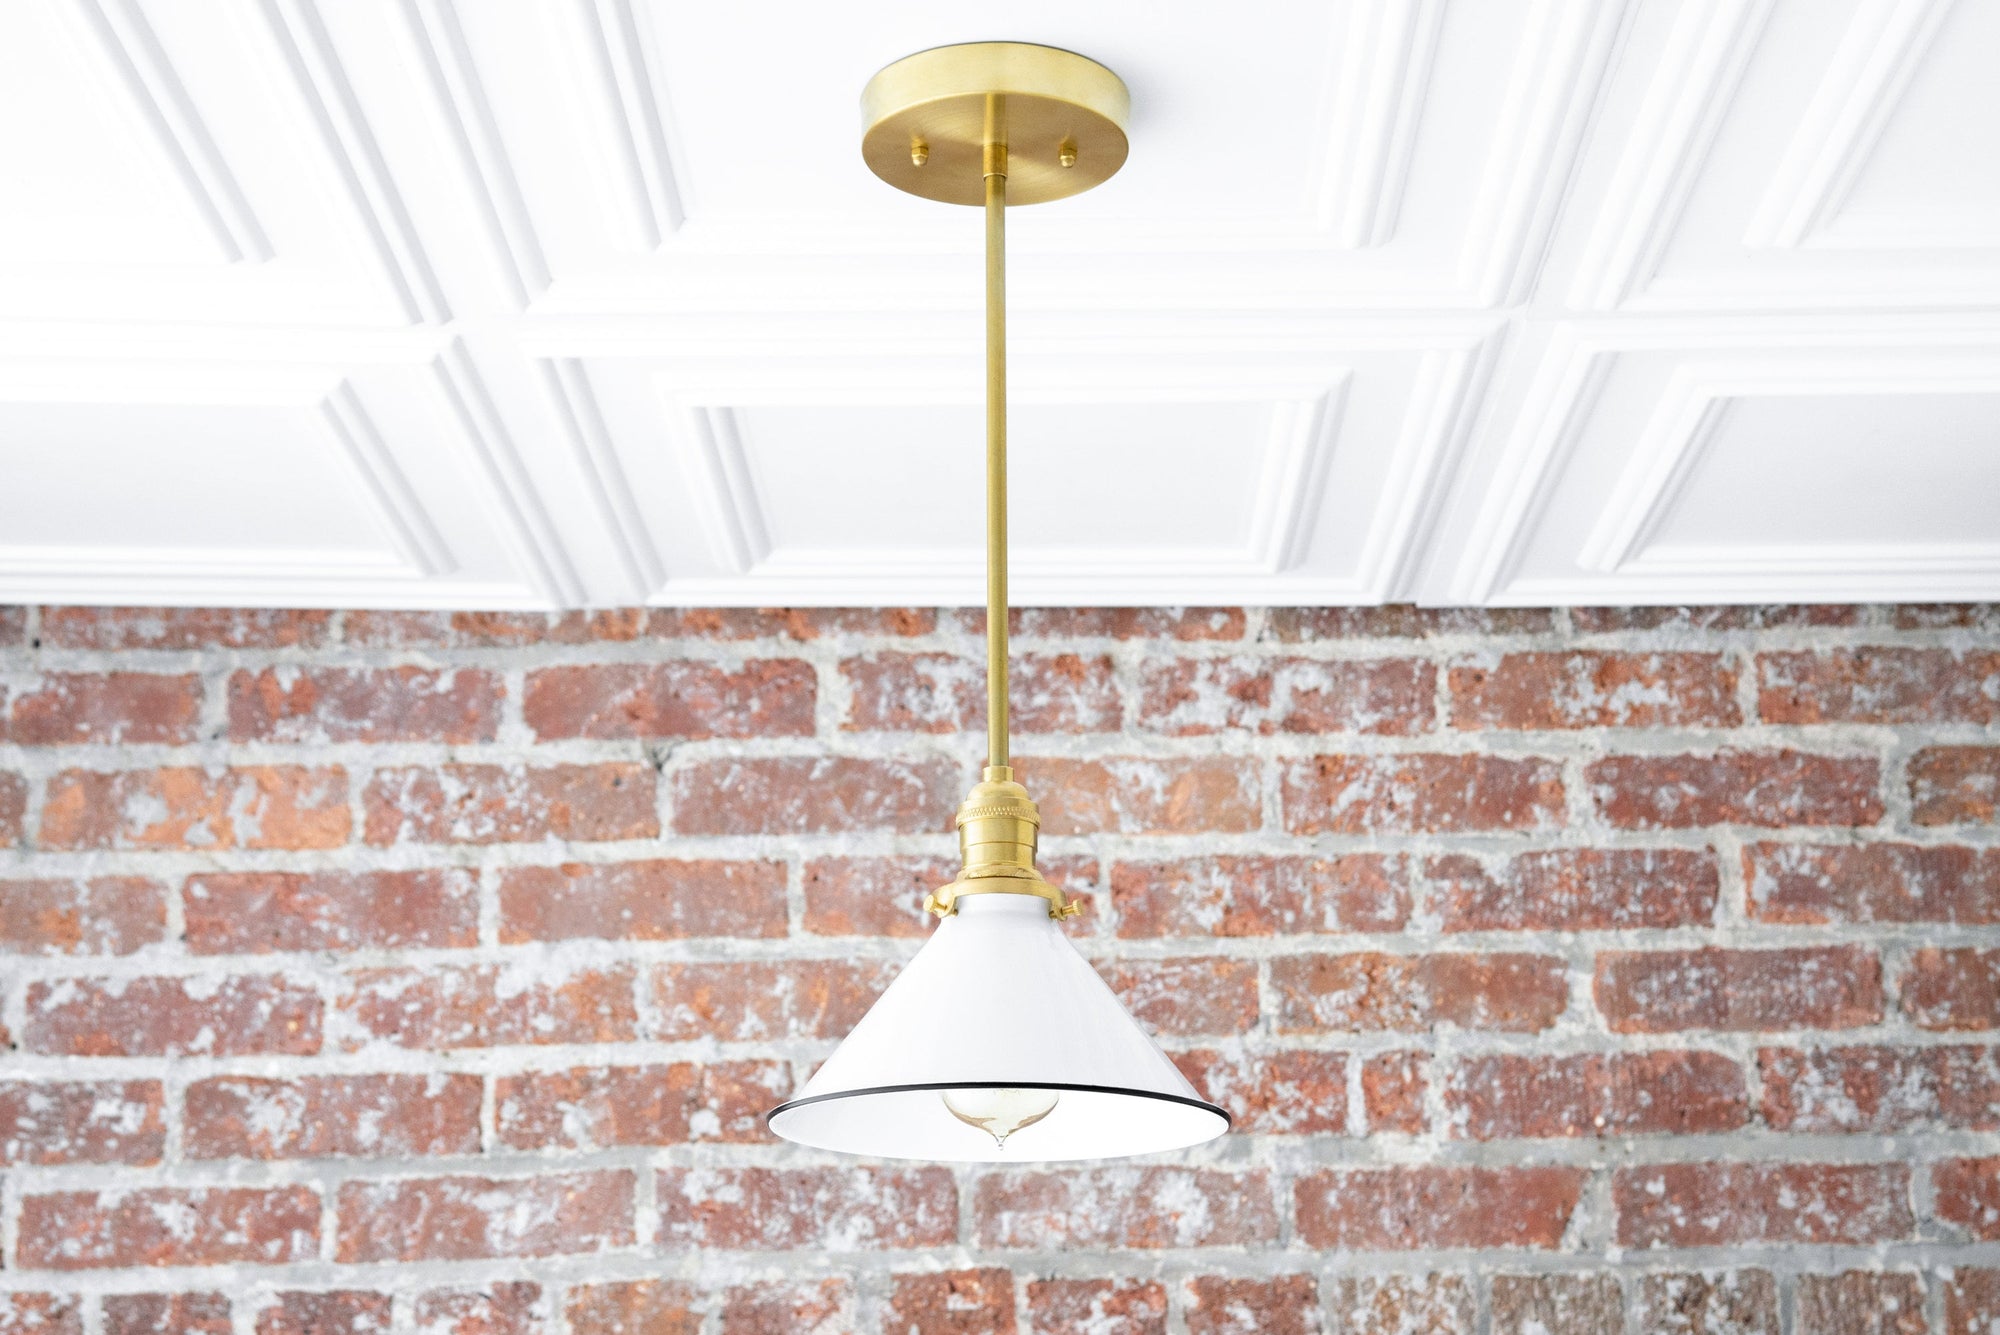 ON TREND - White Plaster Or Gesso Finished Lighting And Home Decor For A  Fresh, Modern Look! — DESIGNED